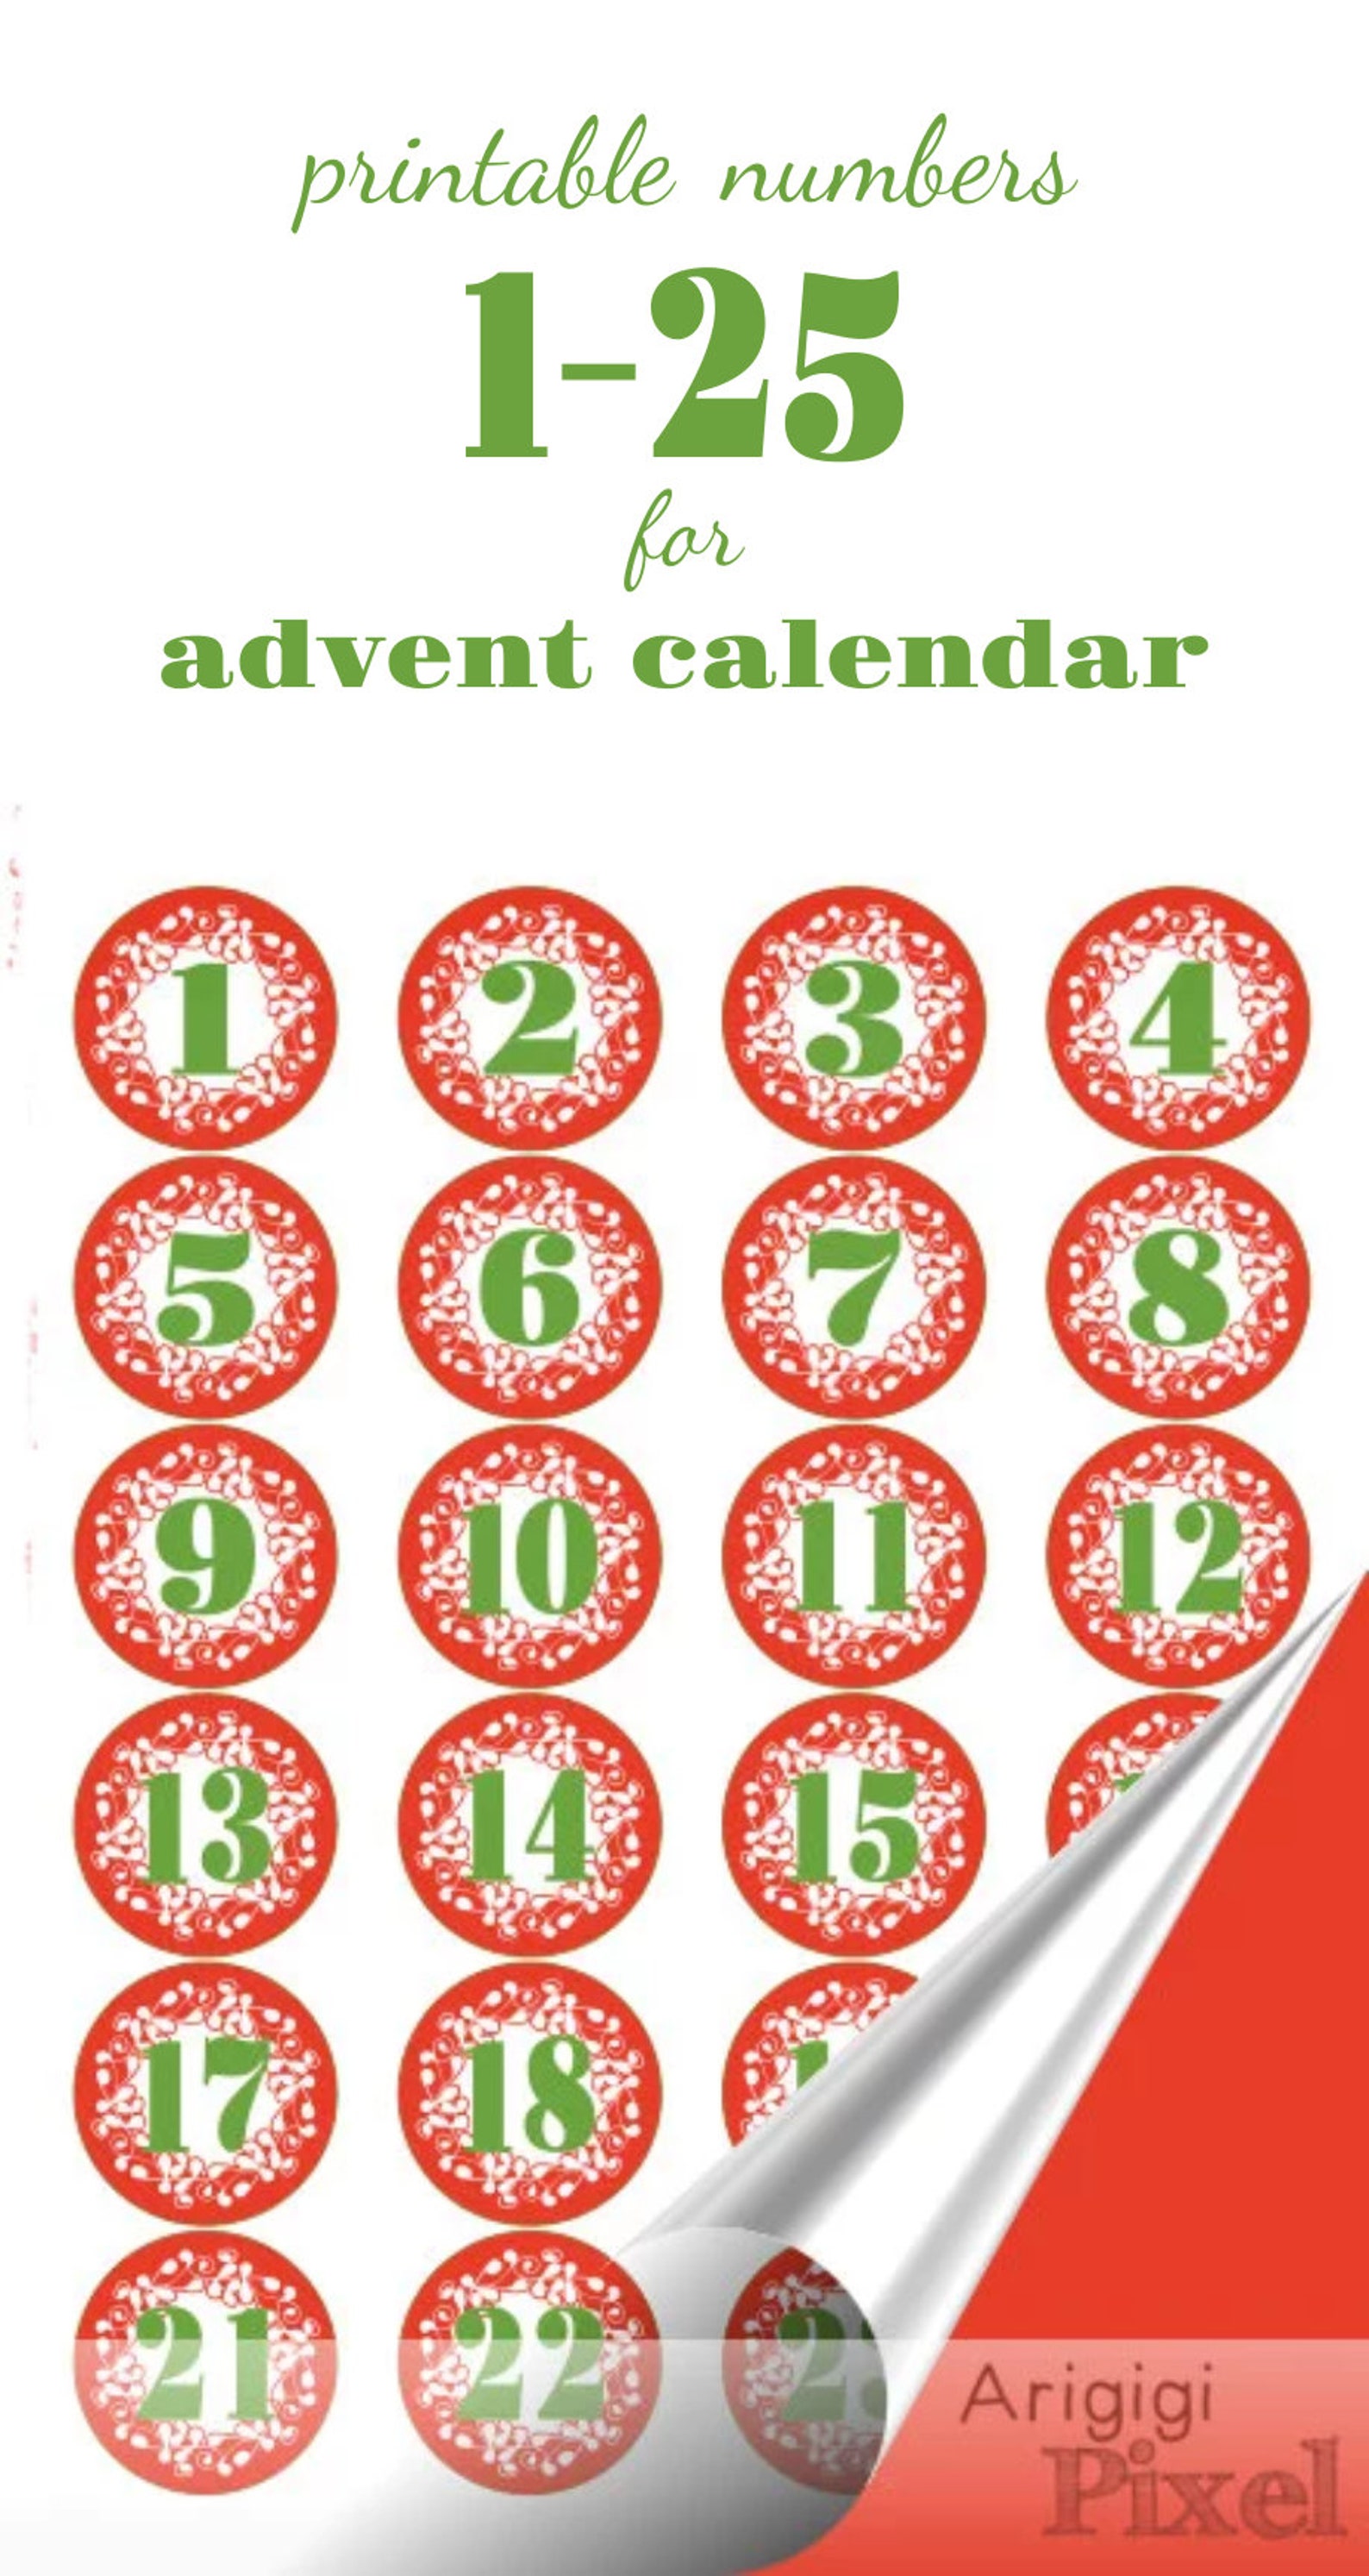 printable-advent-calendar-numbers-1-25-letters-merry-etsy-uk